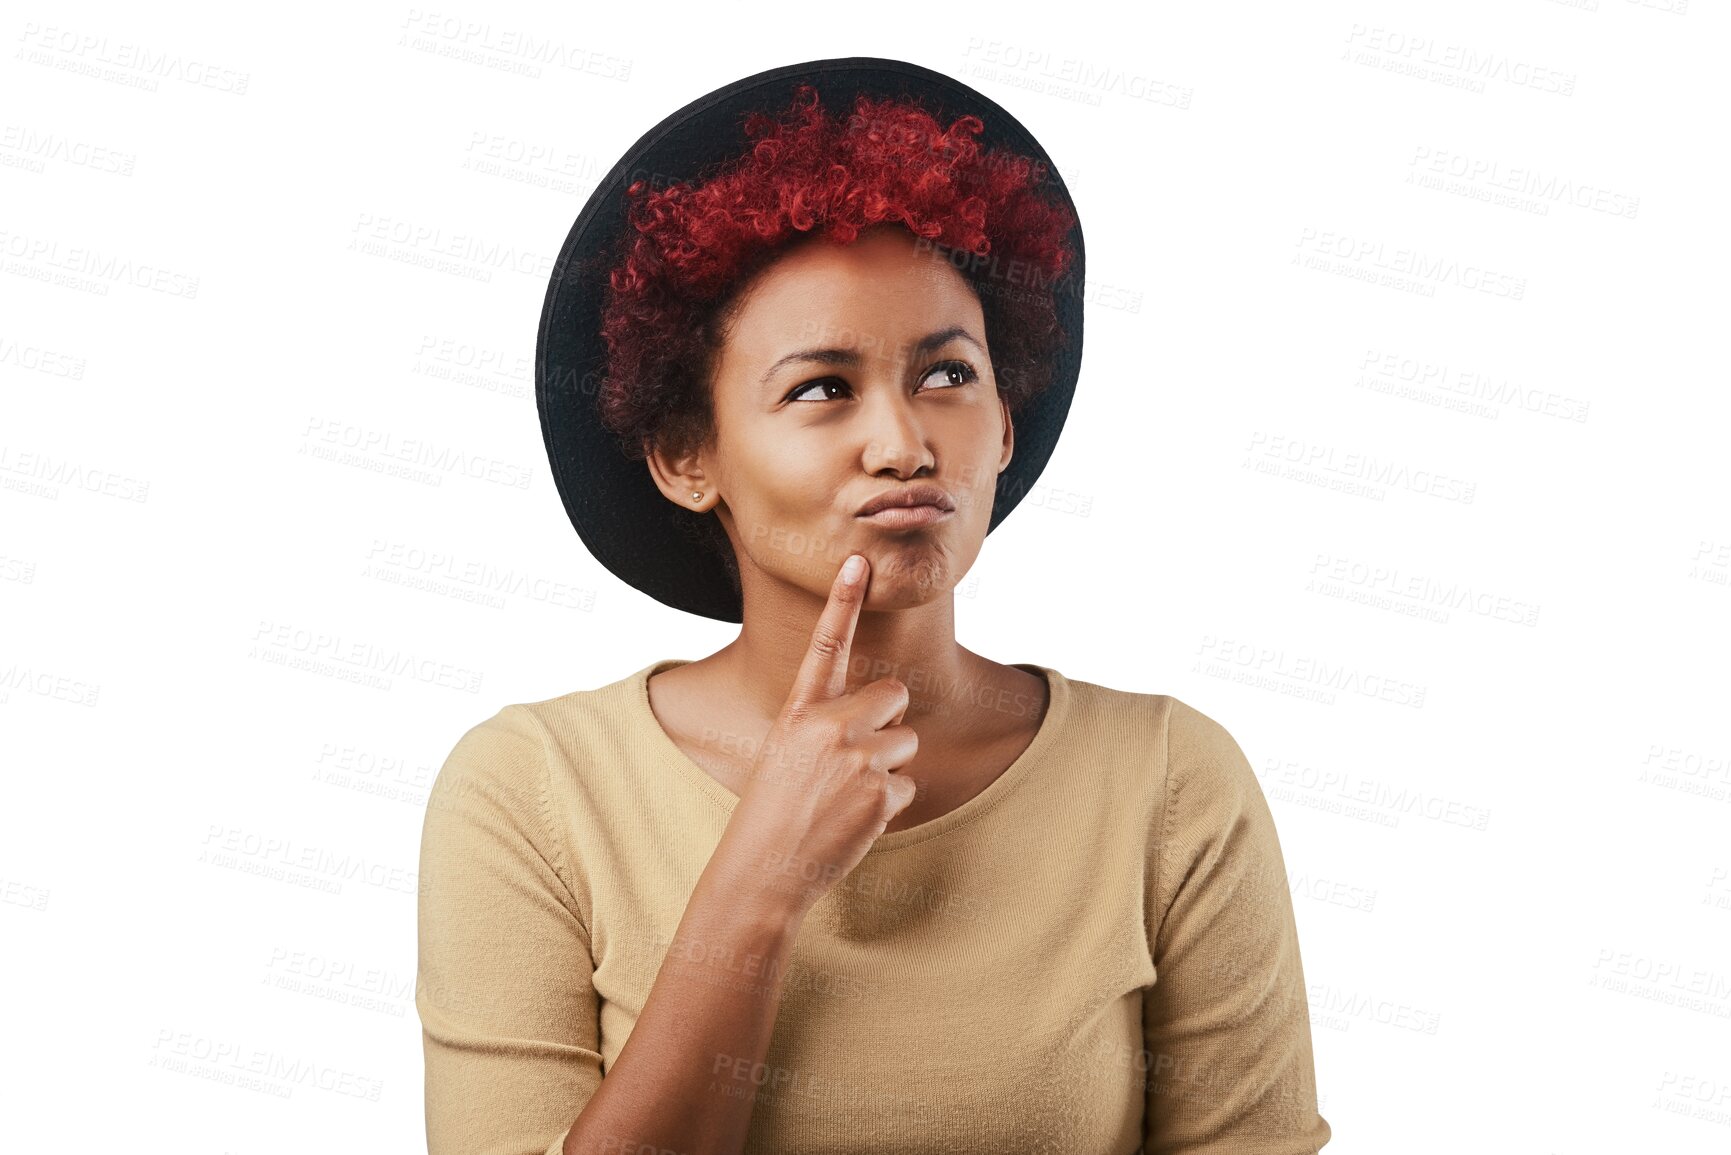 Buy stock photo Fashion, ideas and black woman with hat thinking isolated on transparent png background. Vision, confused and unsure person in cool outfit, trendy style and casual clothes with decision or choice